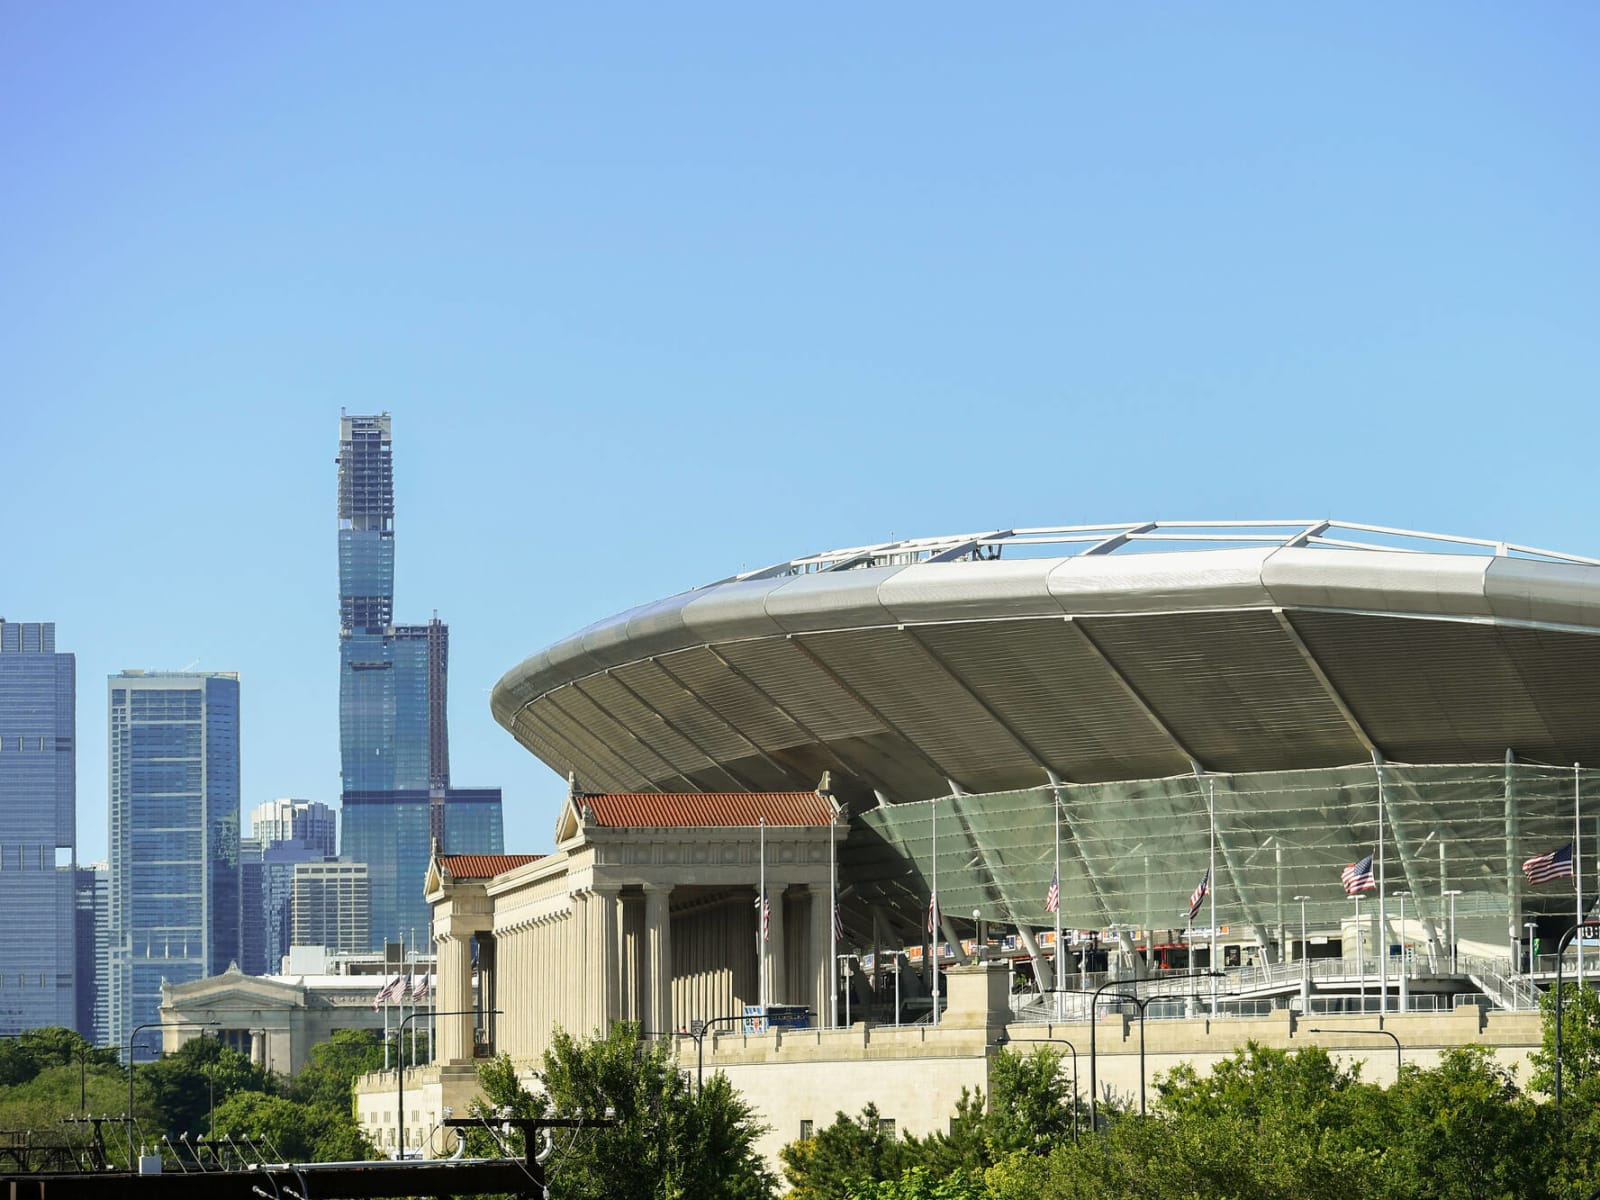 Bears reject idea of dome addition at Soldier Field